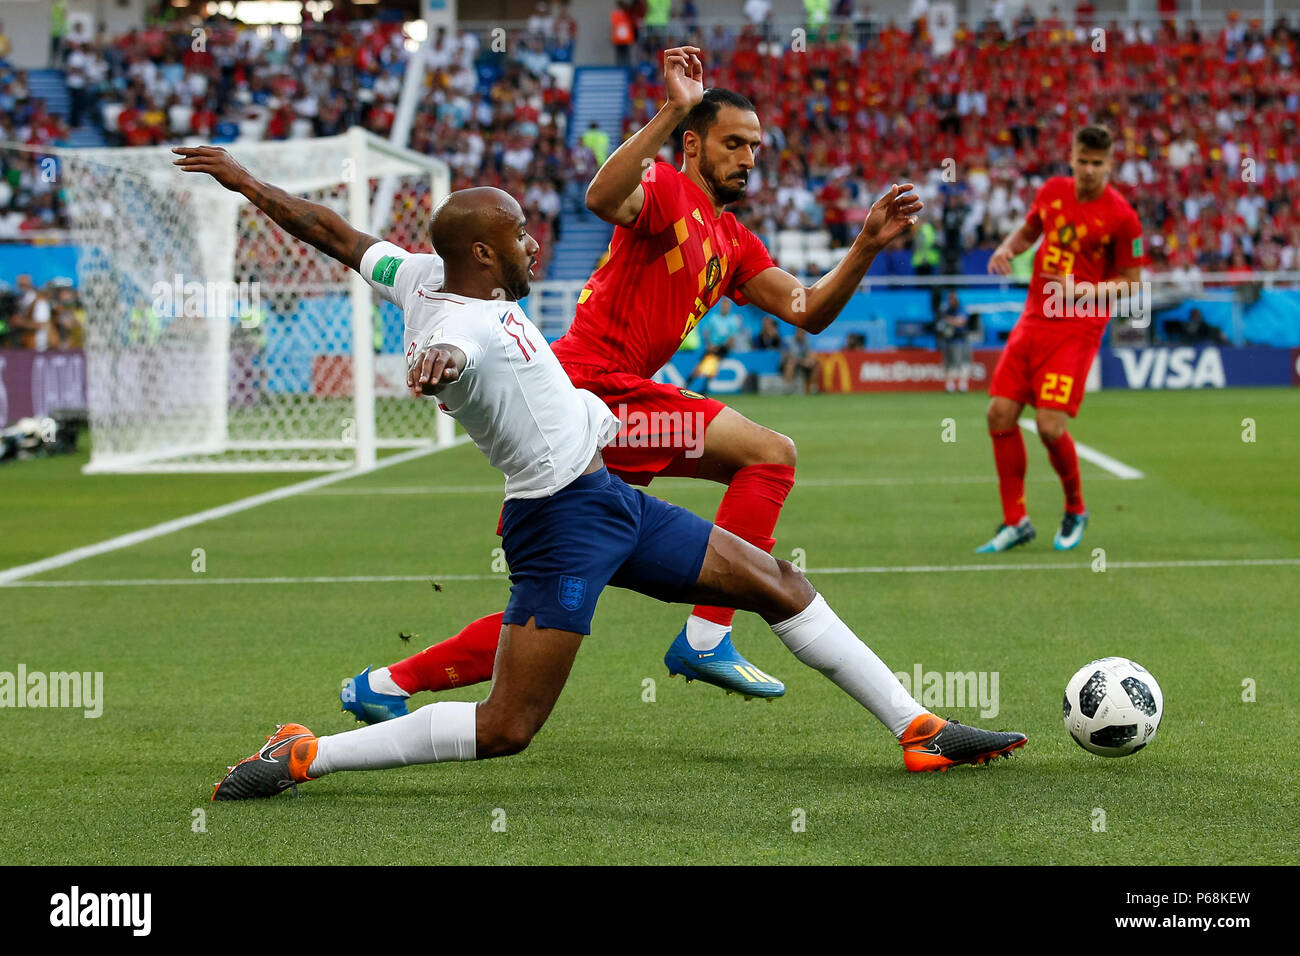 Kaliningrad, Russia. 28th June, 2018. Fabian Delph of England and Nacer Chadli of Belgium during the 2018 FIFA World Cup Group G match between England and Belgium at Kaliningrad Stadium on June 28th 2018 in Kaliningrad, Russia. (Photo by Daniel Chesterton/) Credit: PHC Images/Alamy Live News Stock Photo